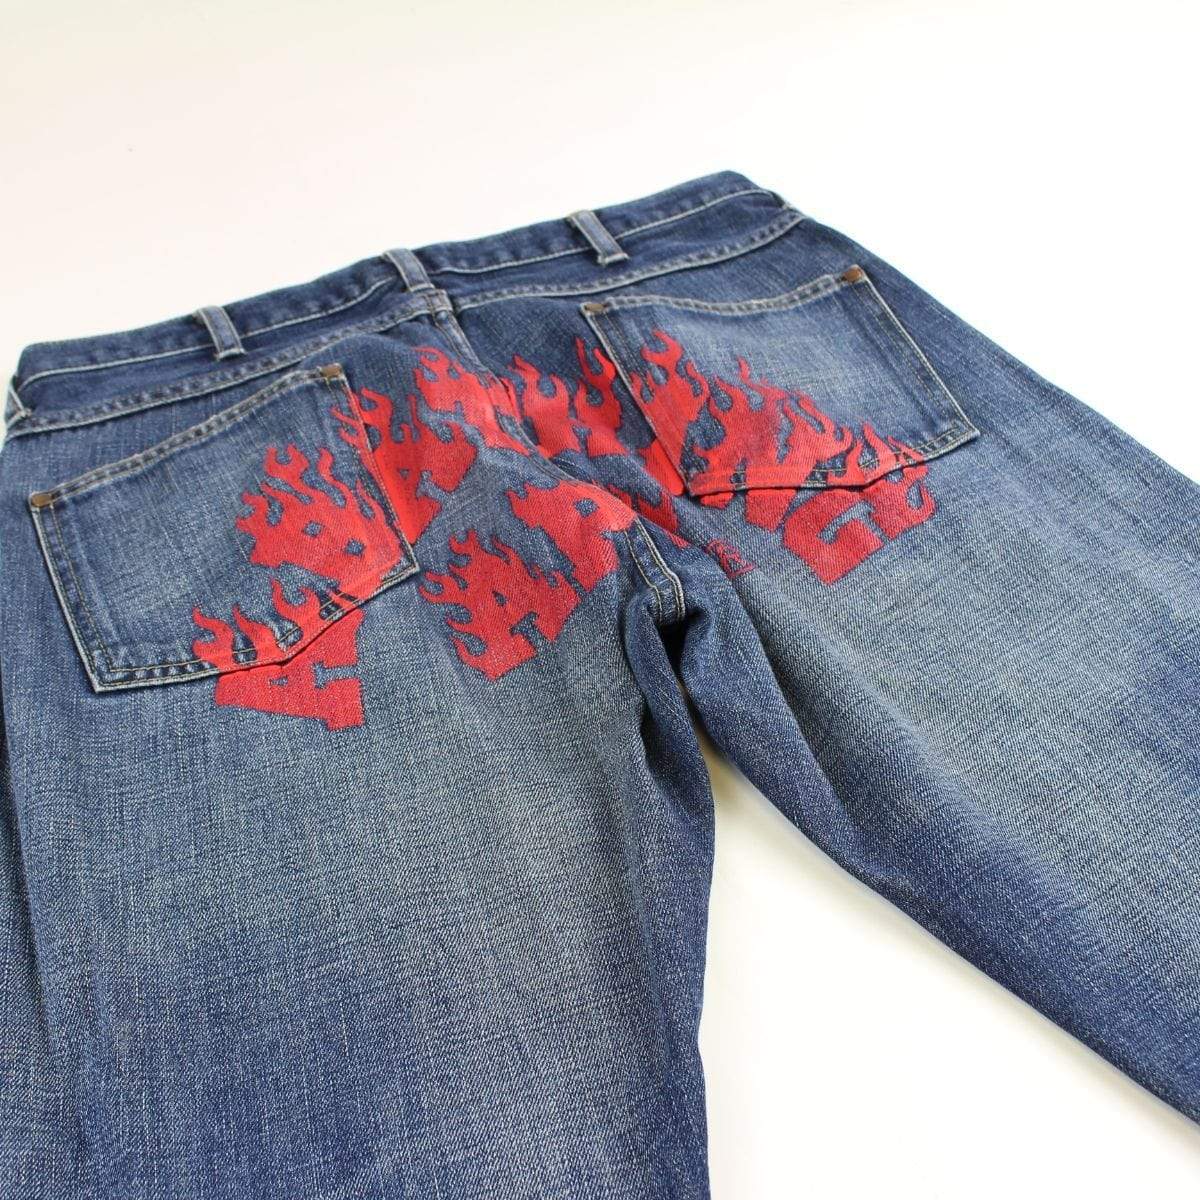 Bape Red Flame Text Jeans - SaruGeneral